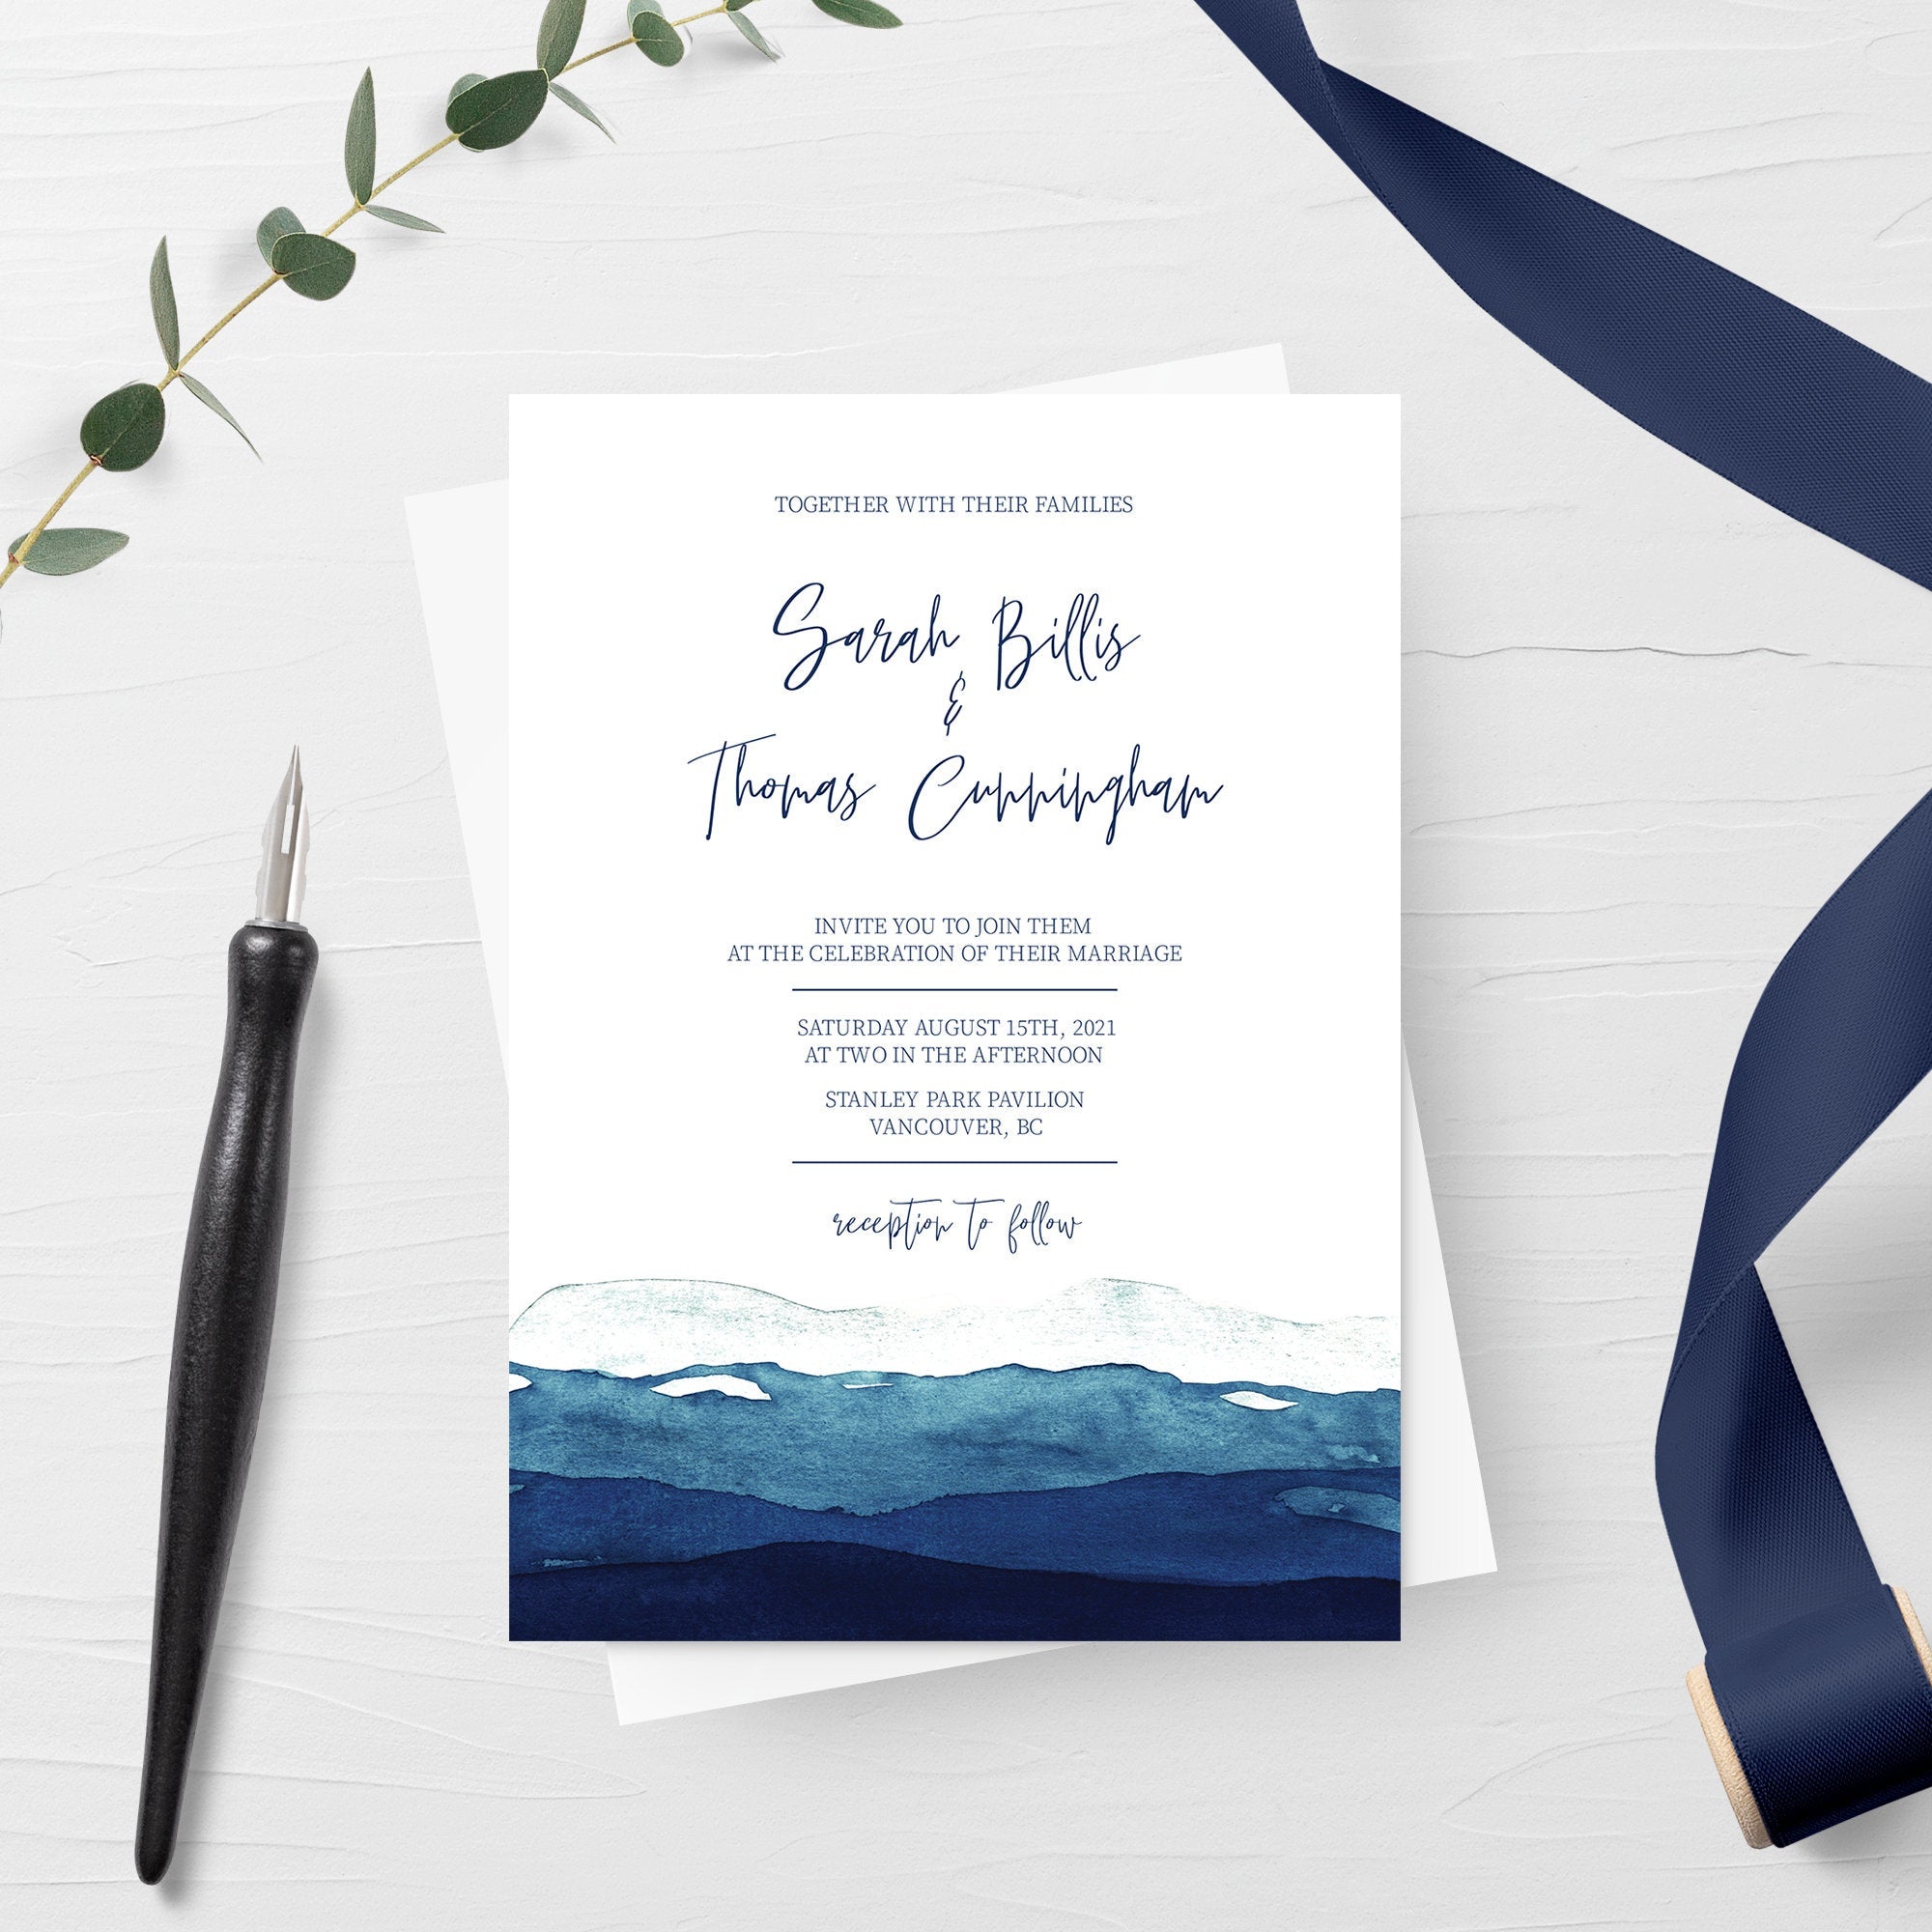 Beach Themed Wedding Invitations, Printable Modern Beach Wedding Invitations Template, Ocean Wedding Invite Set, INSTANT DOWNLOAD - MB400